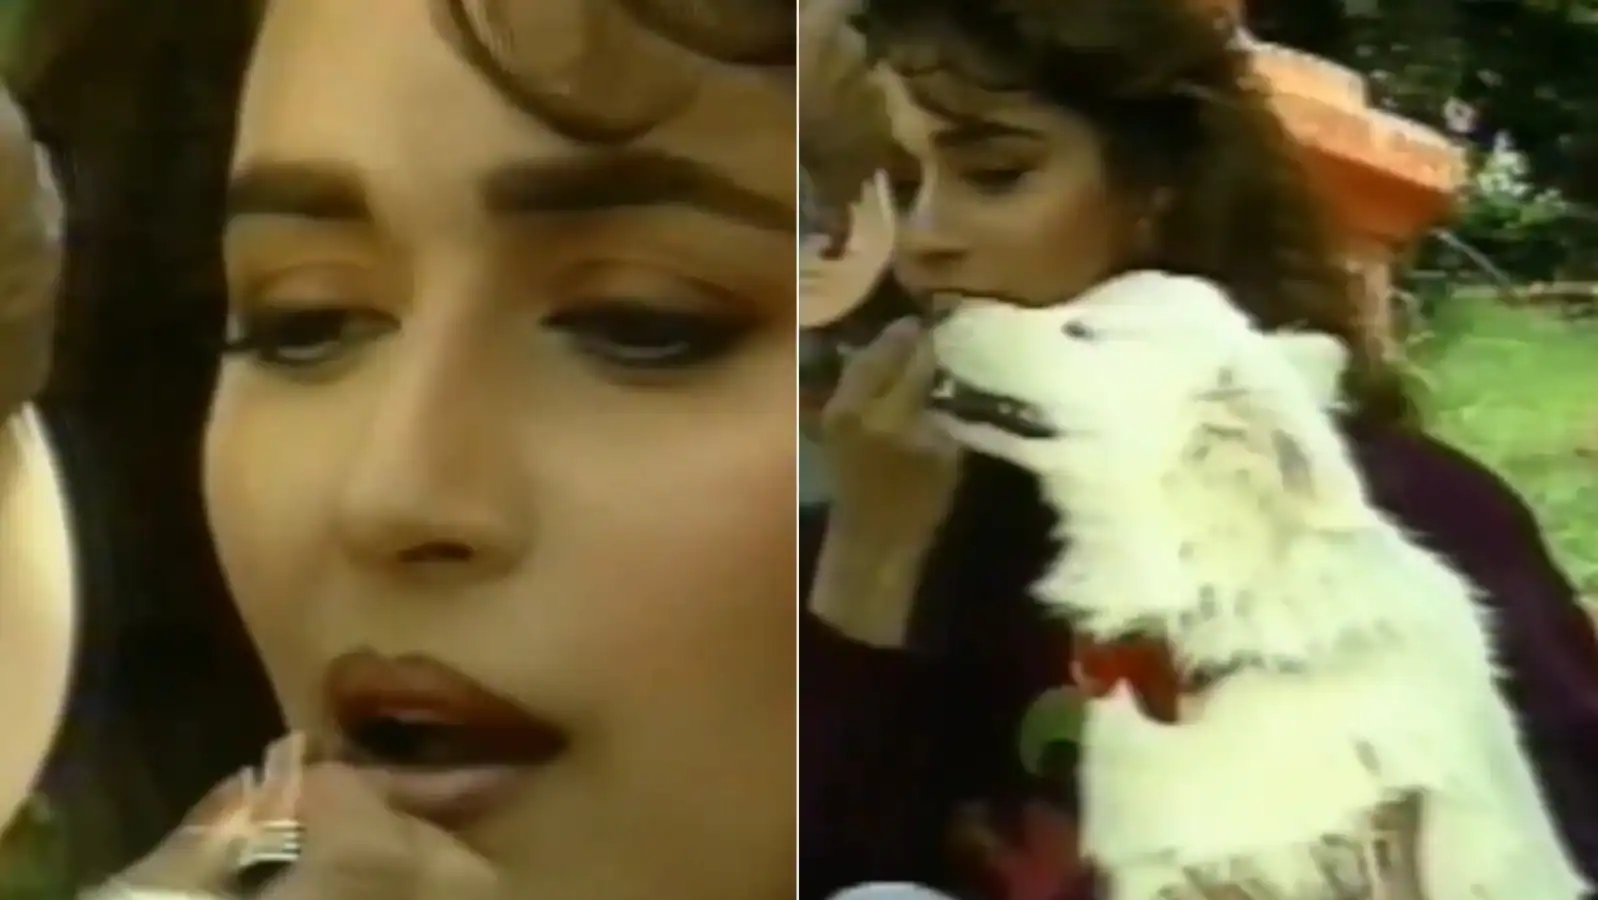 Madhuri Dixit and Tuffy get ready together on sets of Hum Aapke Hain Koun BTS video. Watch